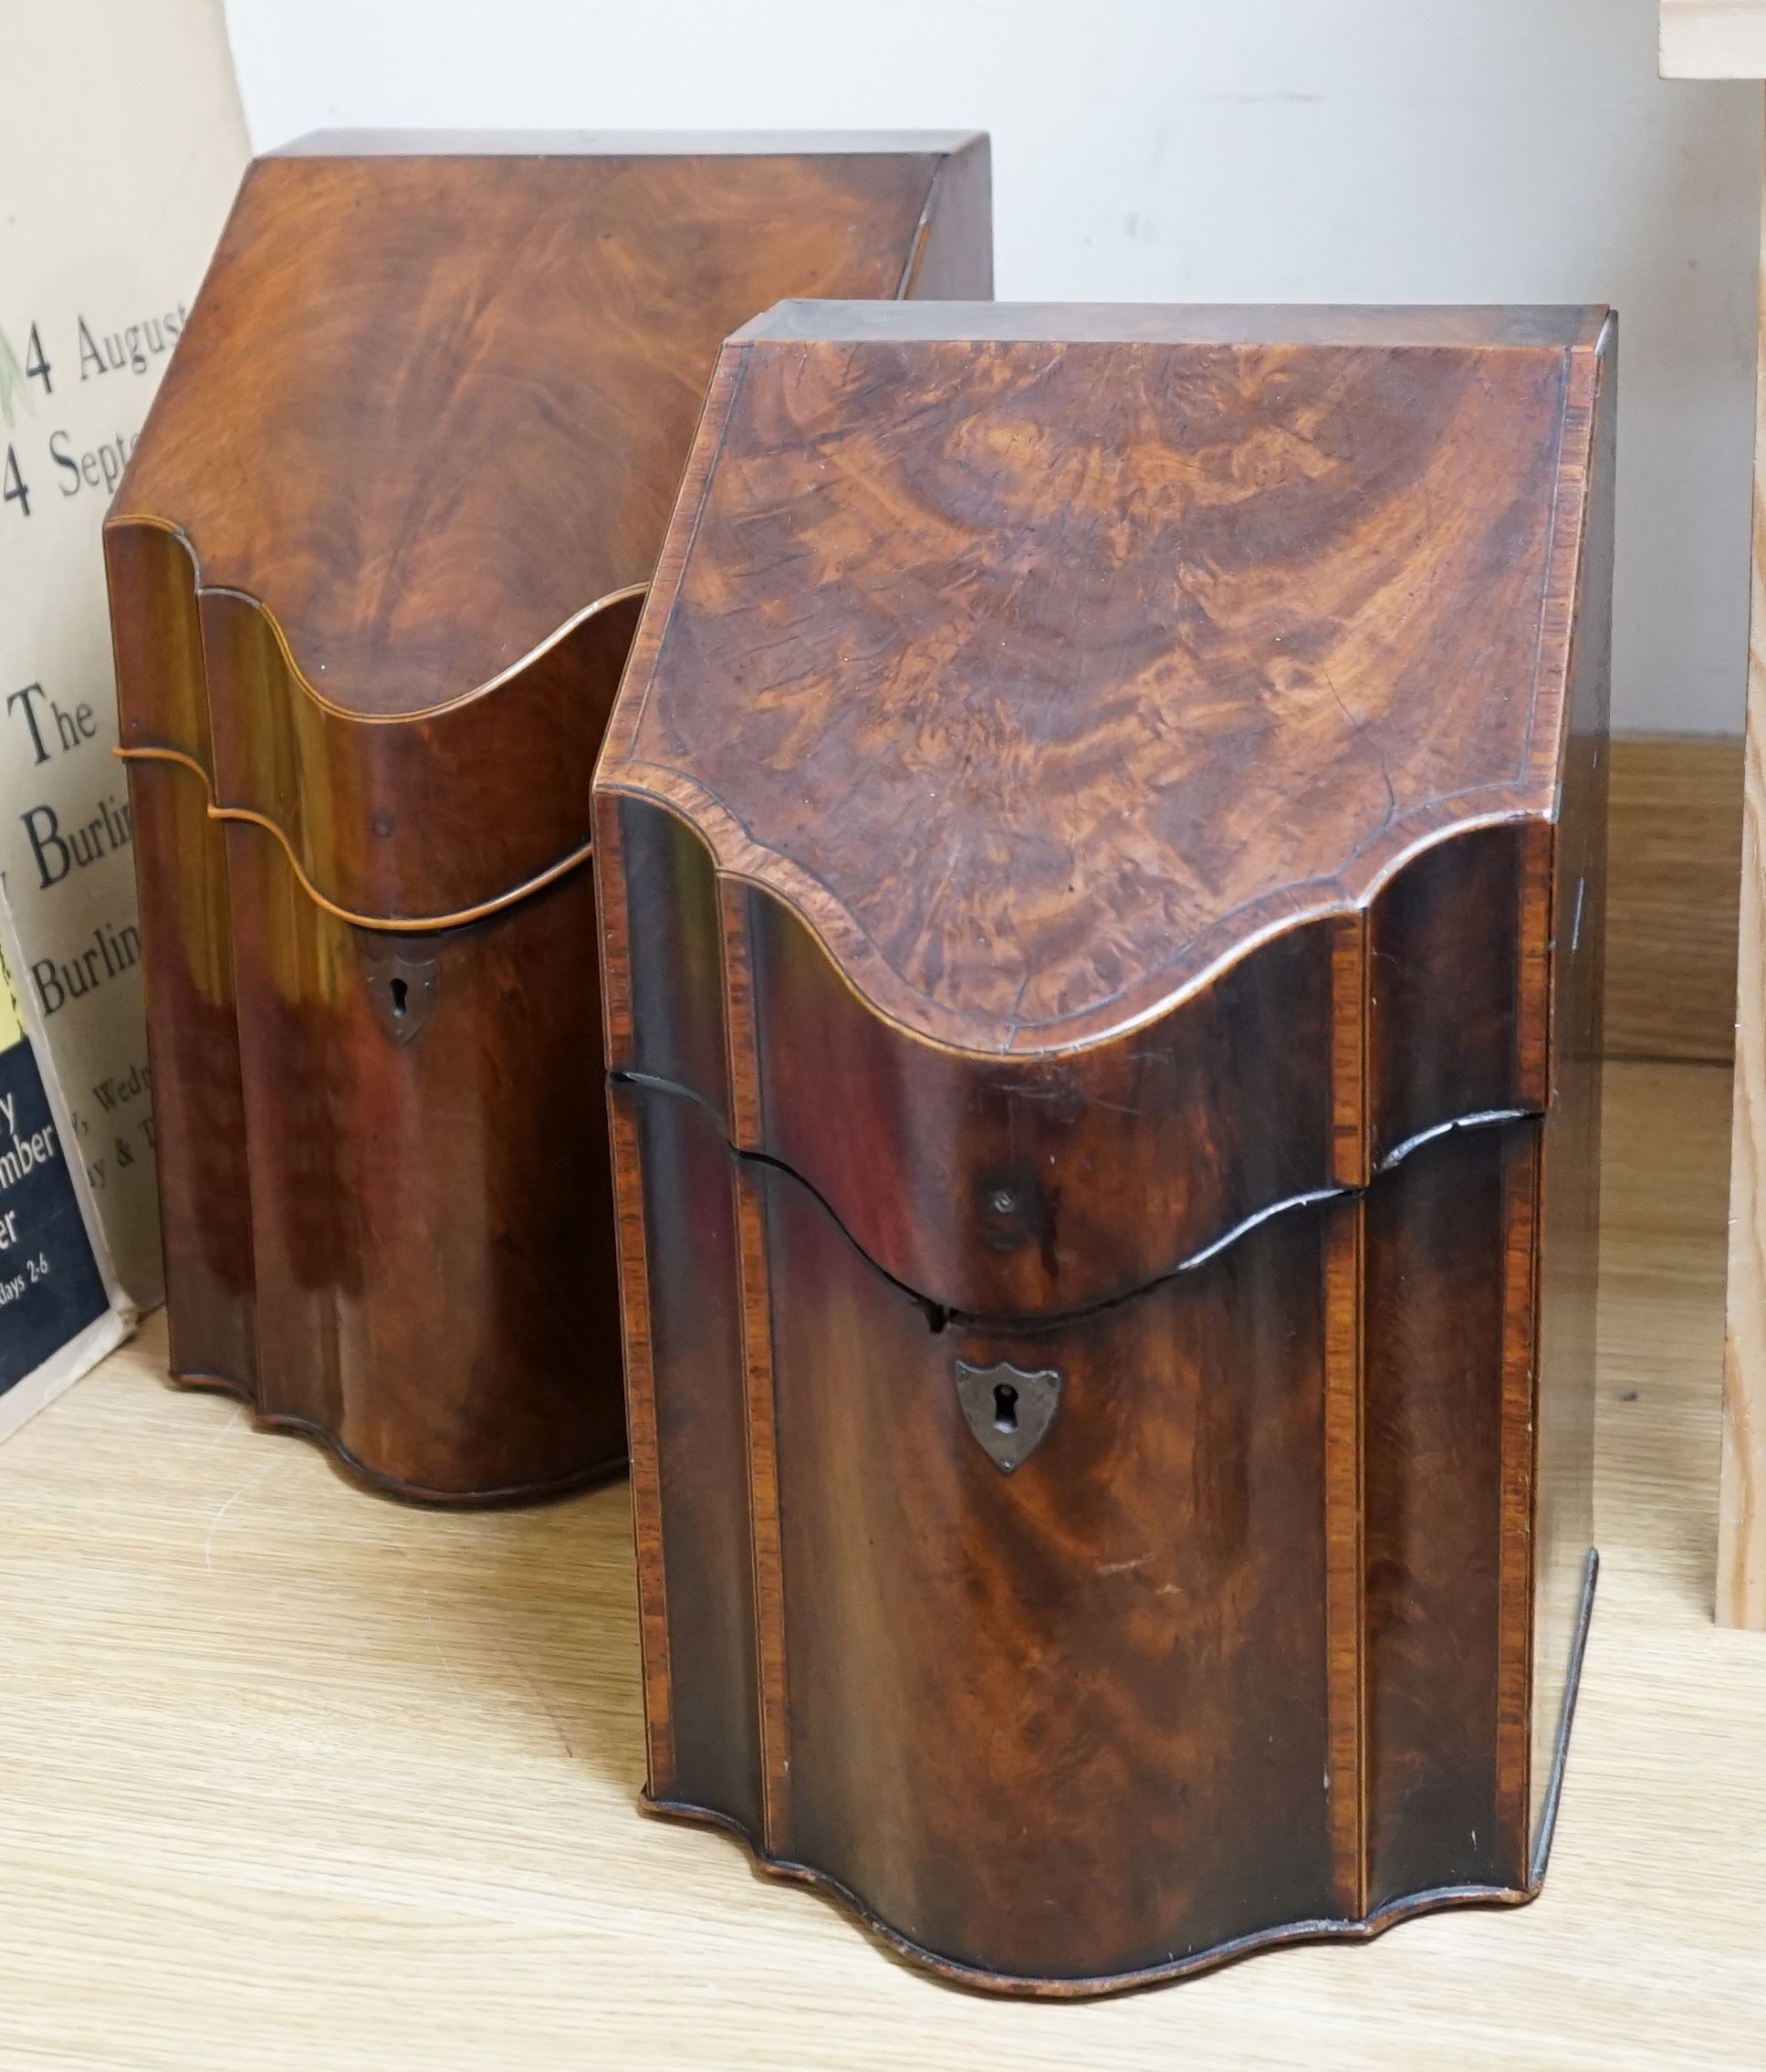 Two George III line inlaid mahogany knife boxes - one converted to a cellarette